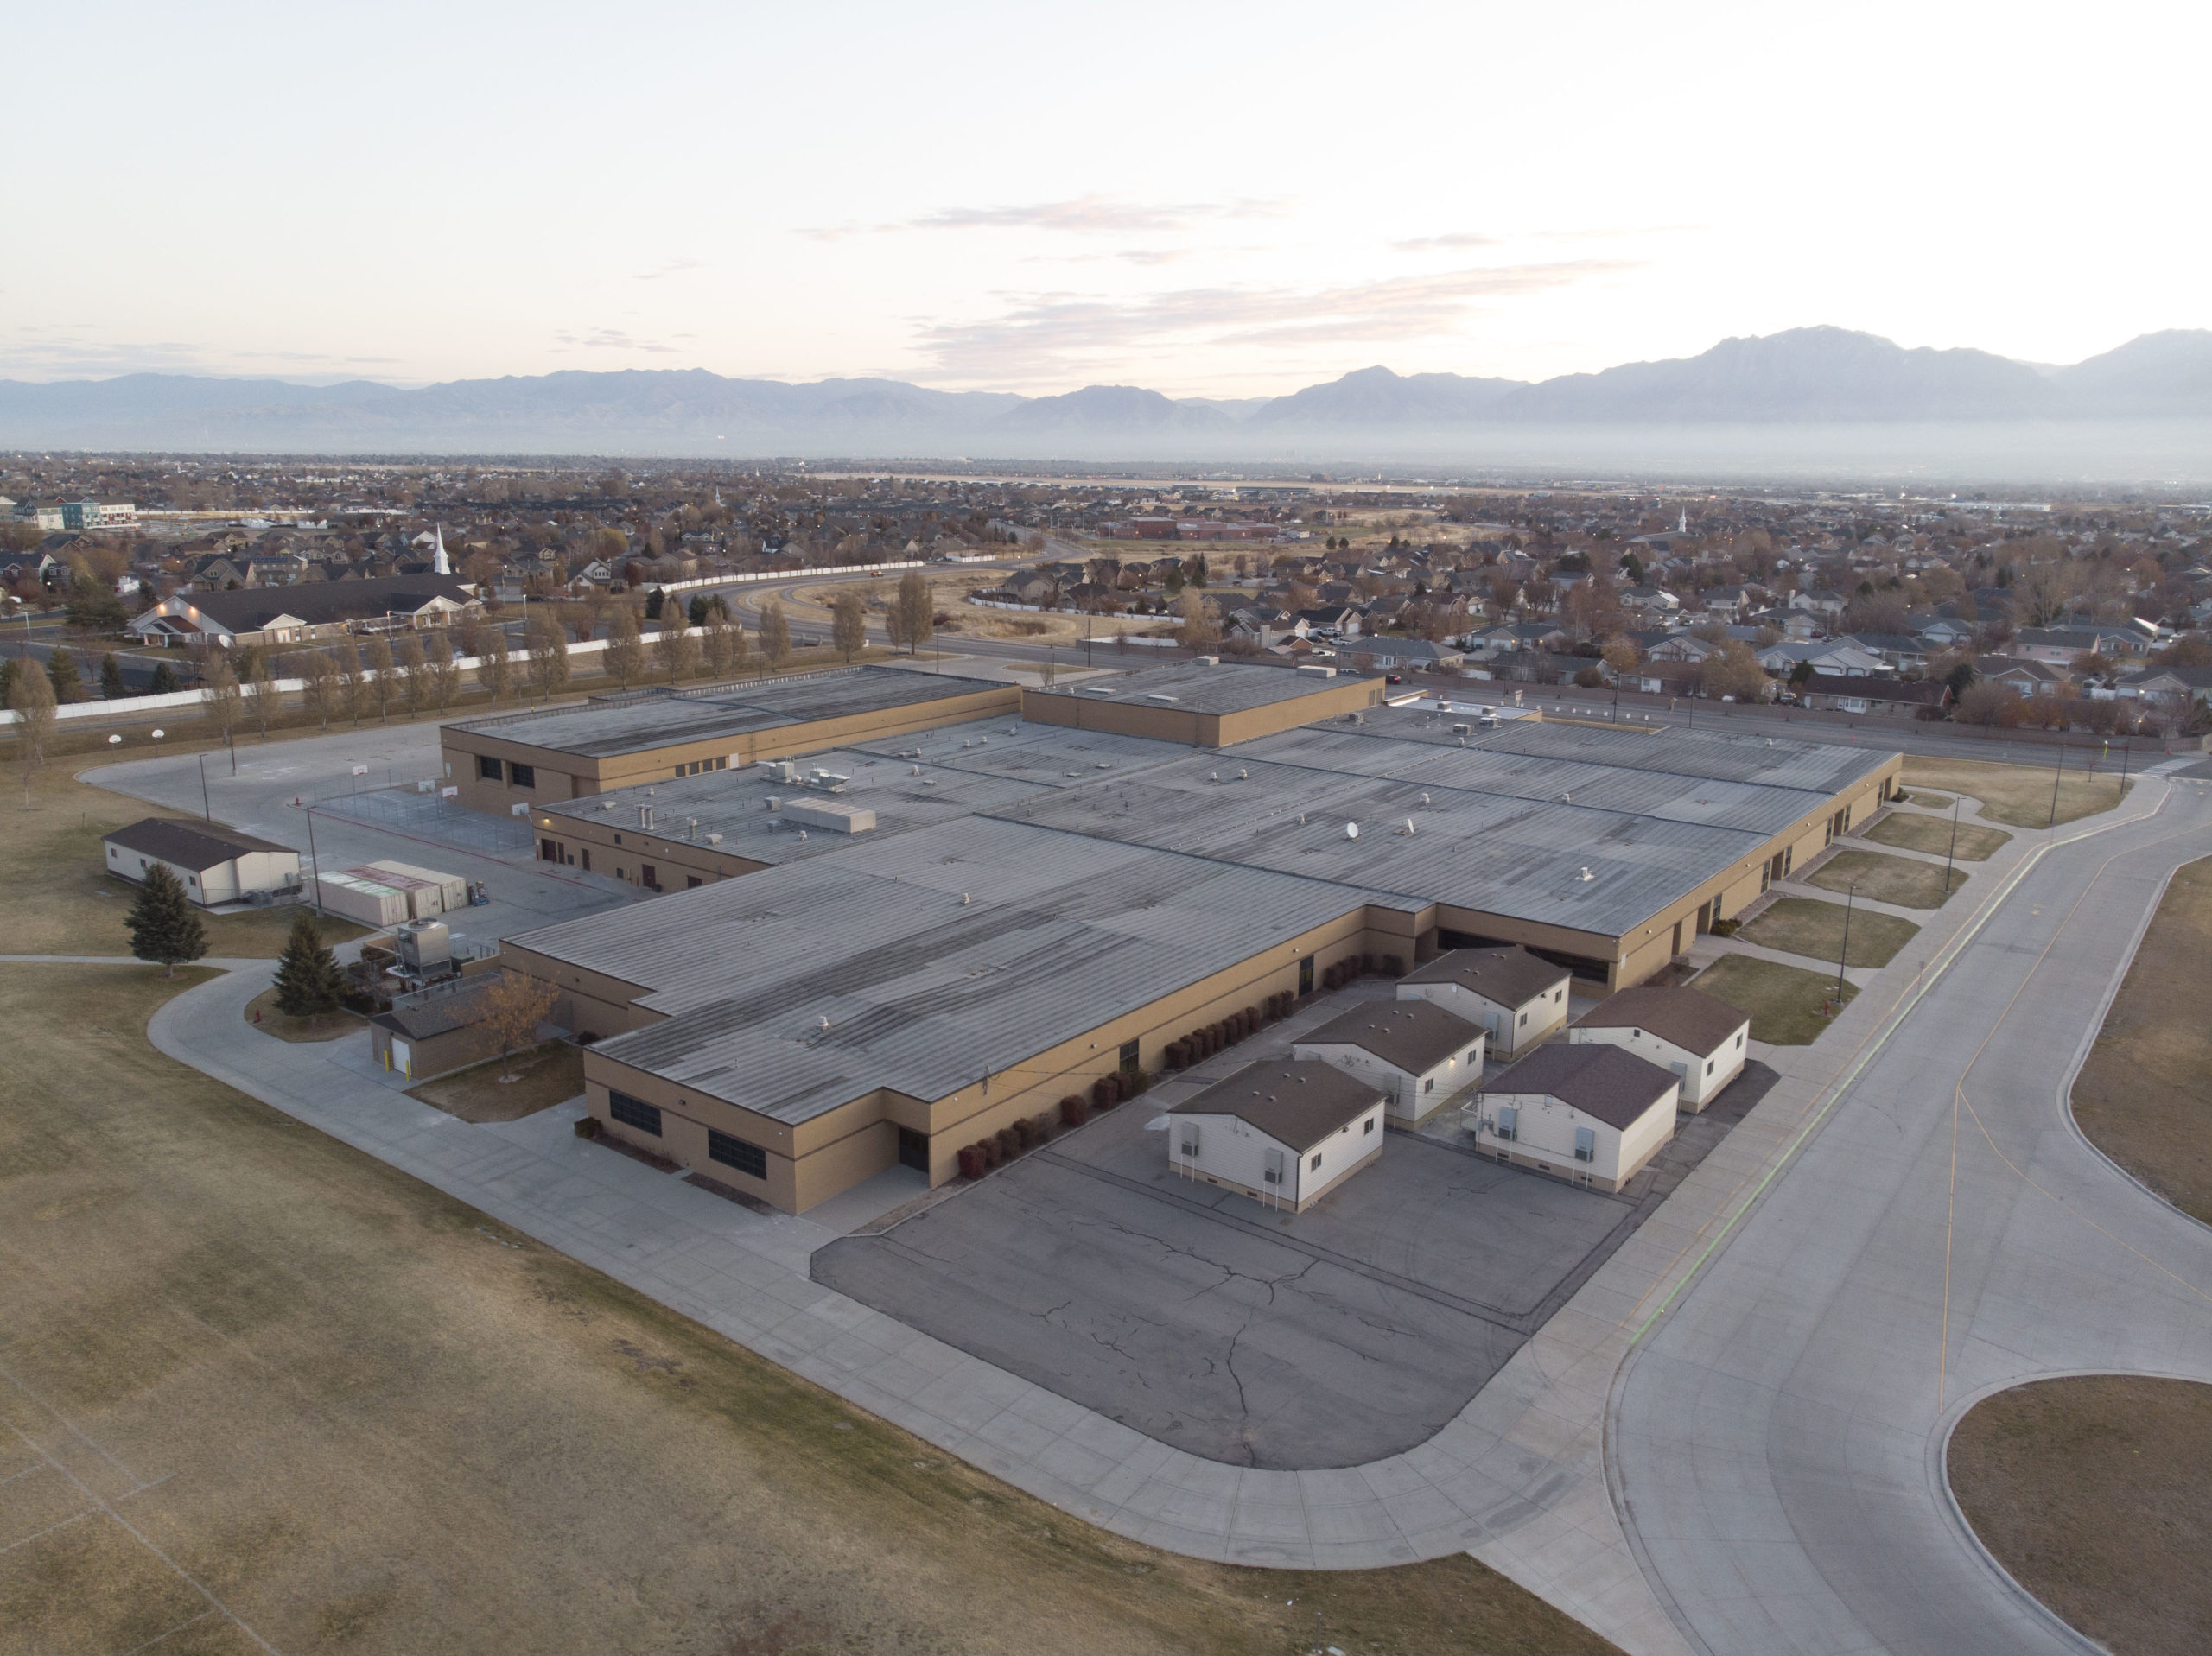 An arial view of West Hills Middle School from the back looking toward the Wasatch Mountains.